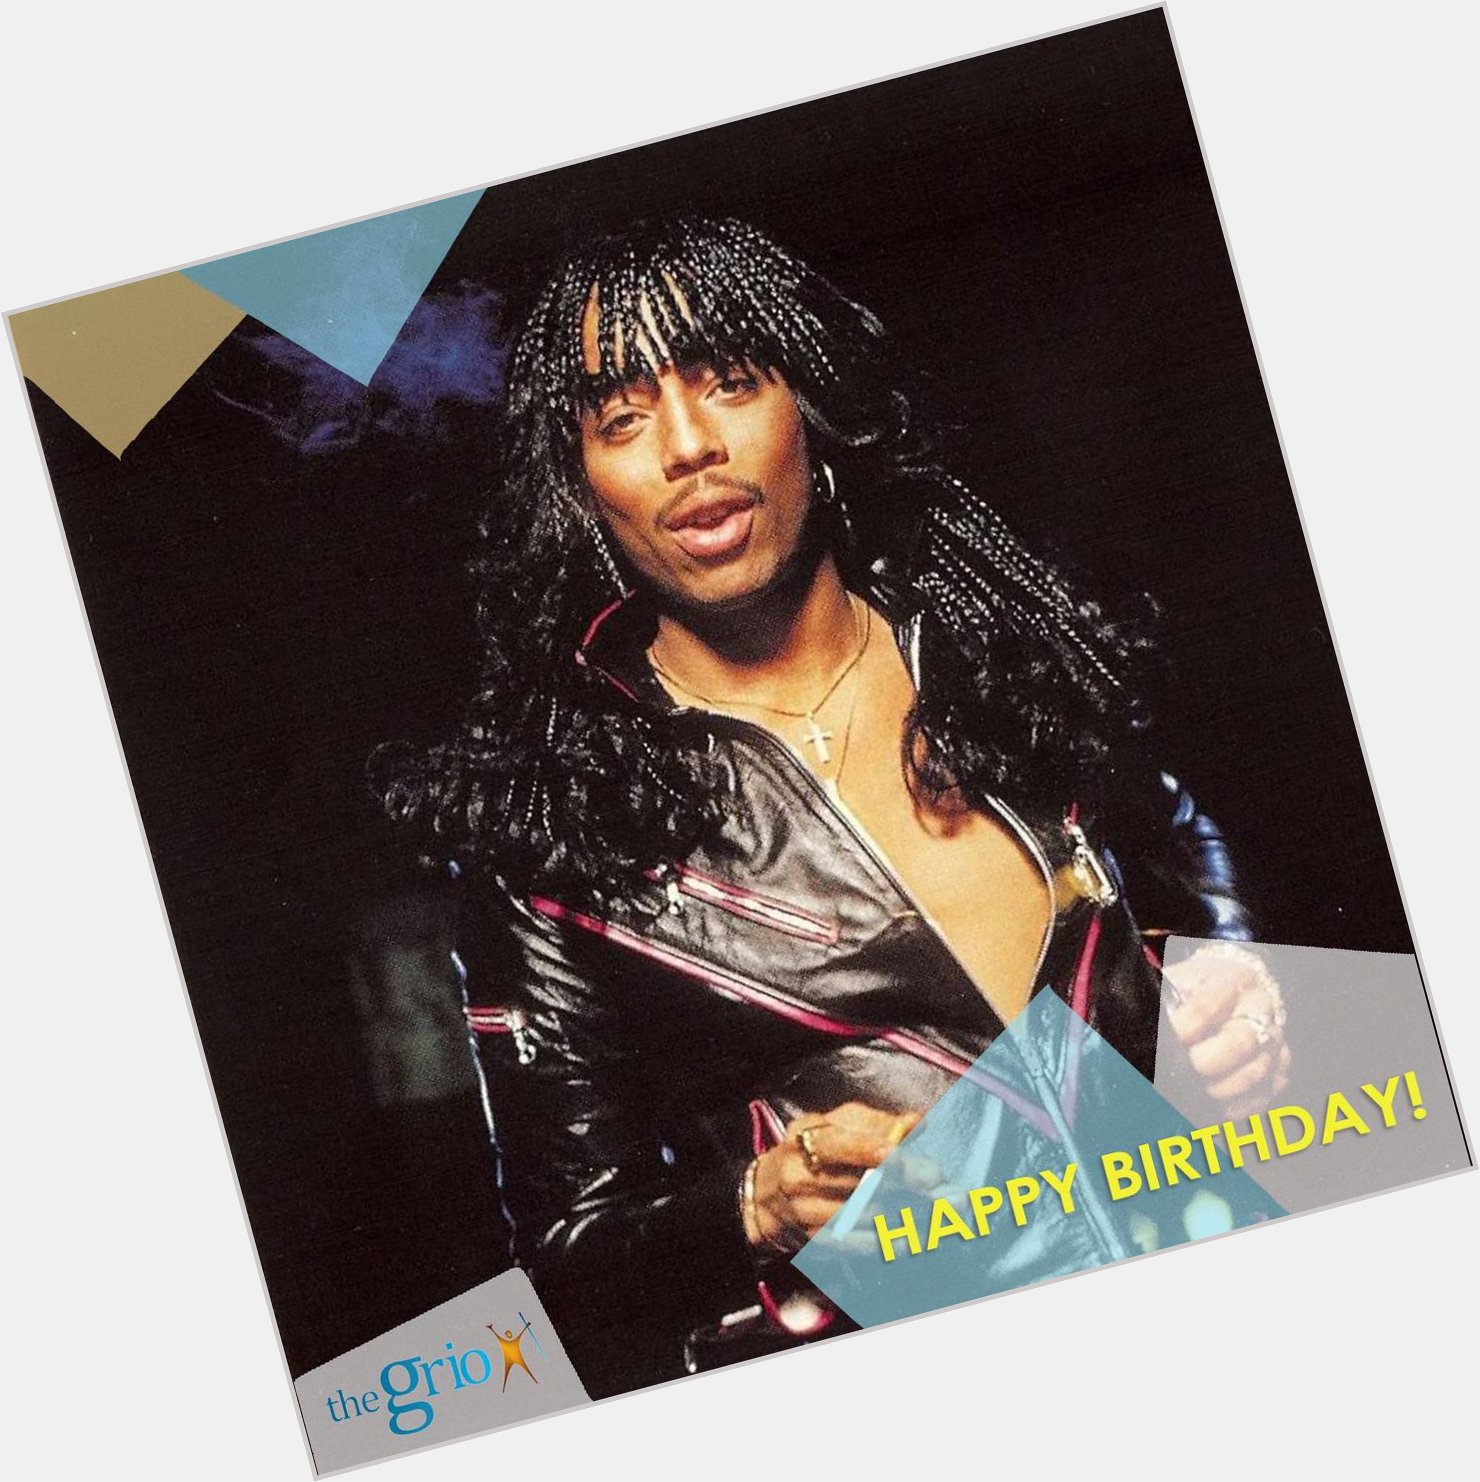 Today, Rick James would have turned 70! Happy Birthday to the master of Punk Funk! 